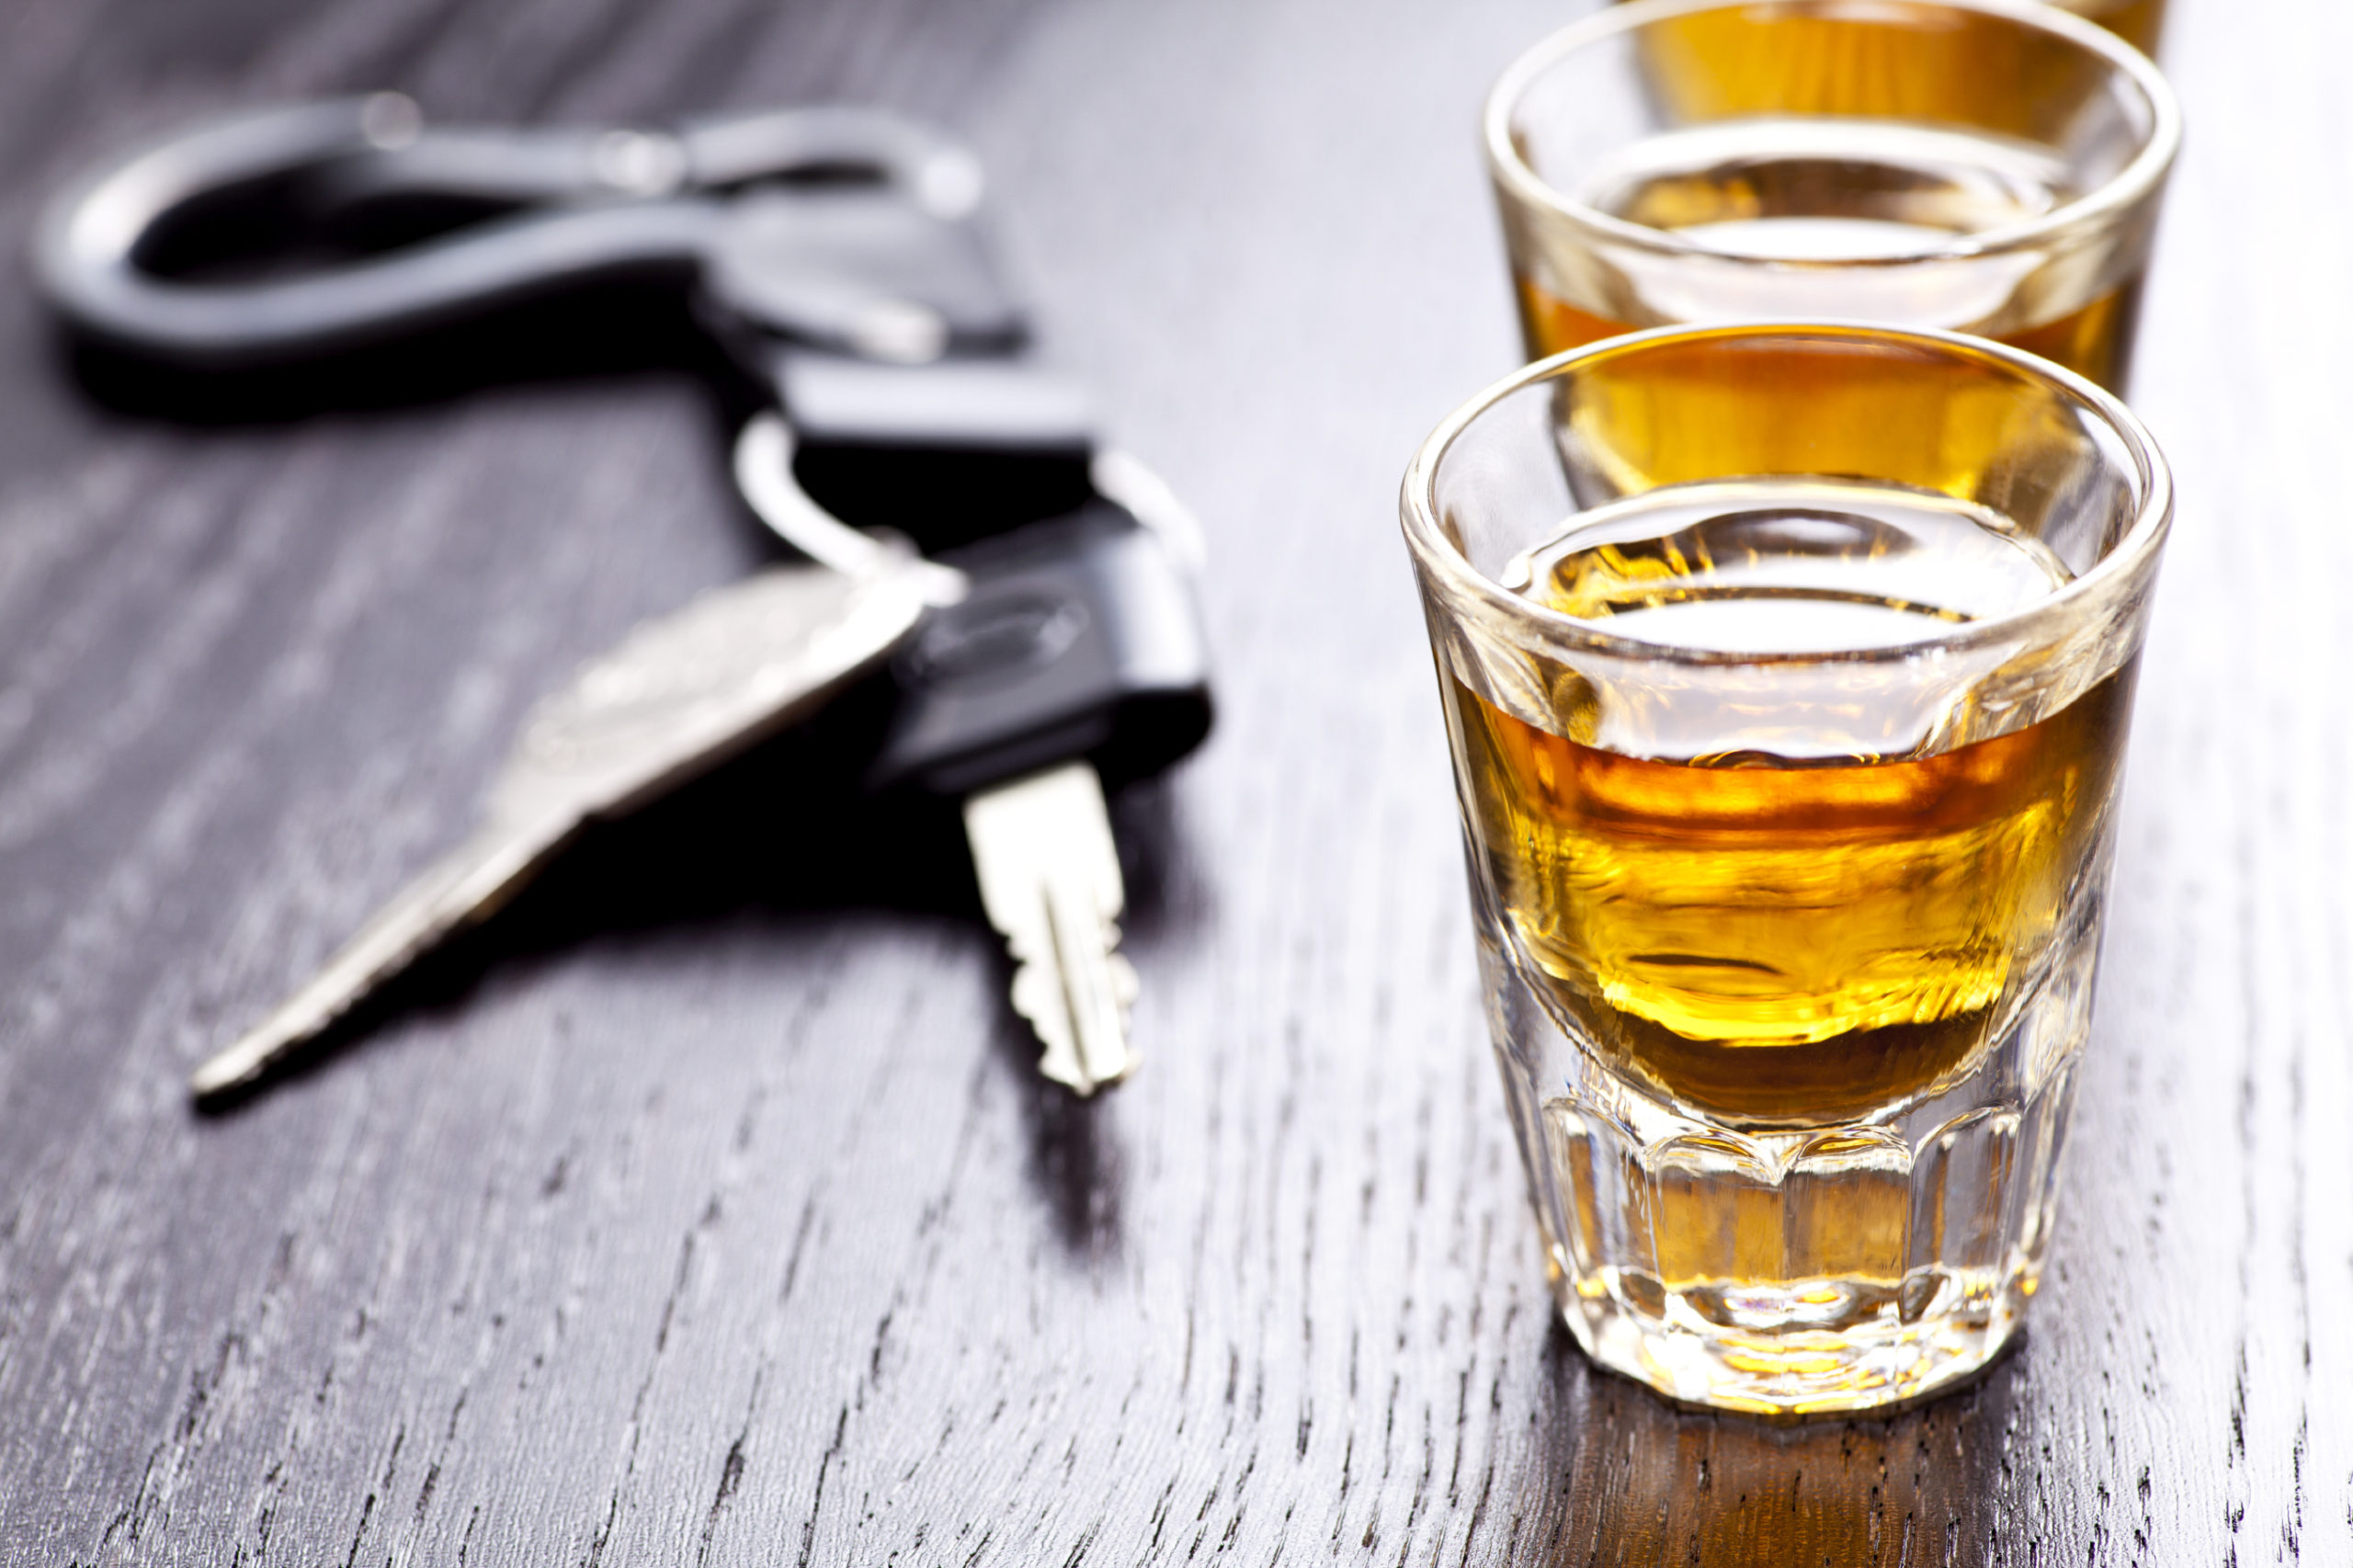 Drunk driving accident attorney Houston - car accident lawyer